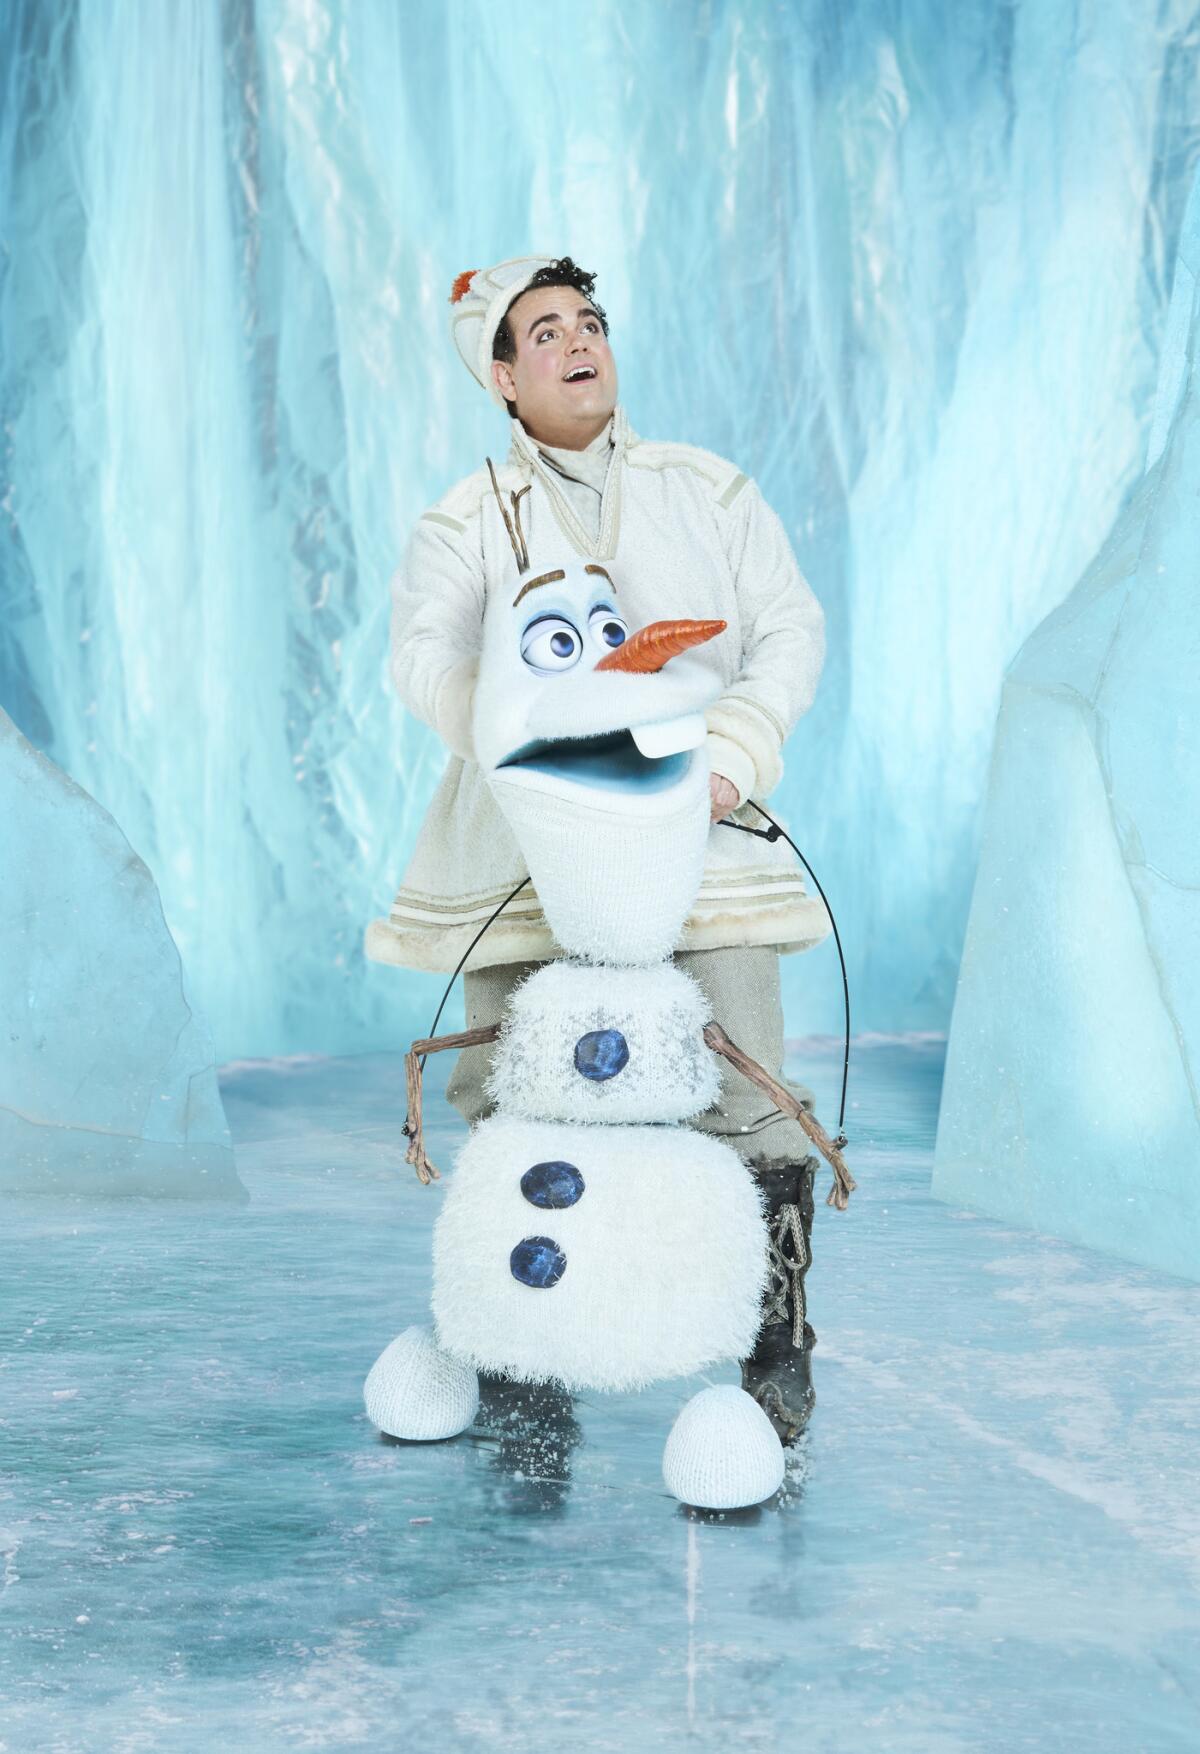 Greg Hildreth as Olaf in the Broadway musical "Frozen."